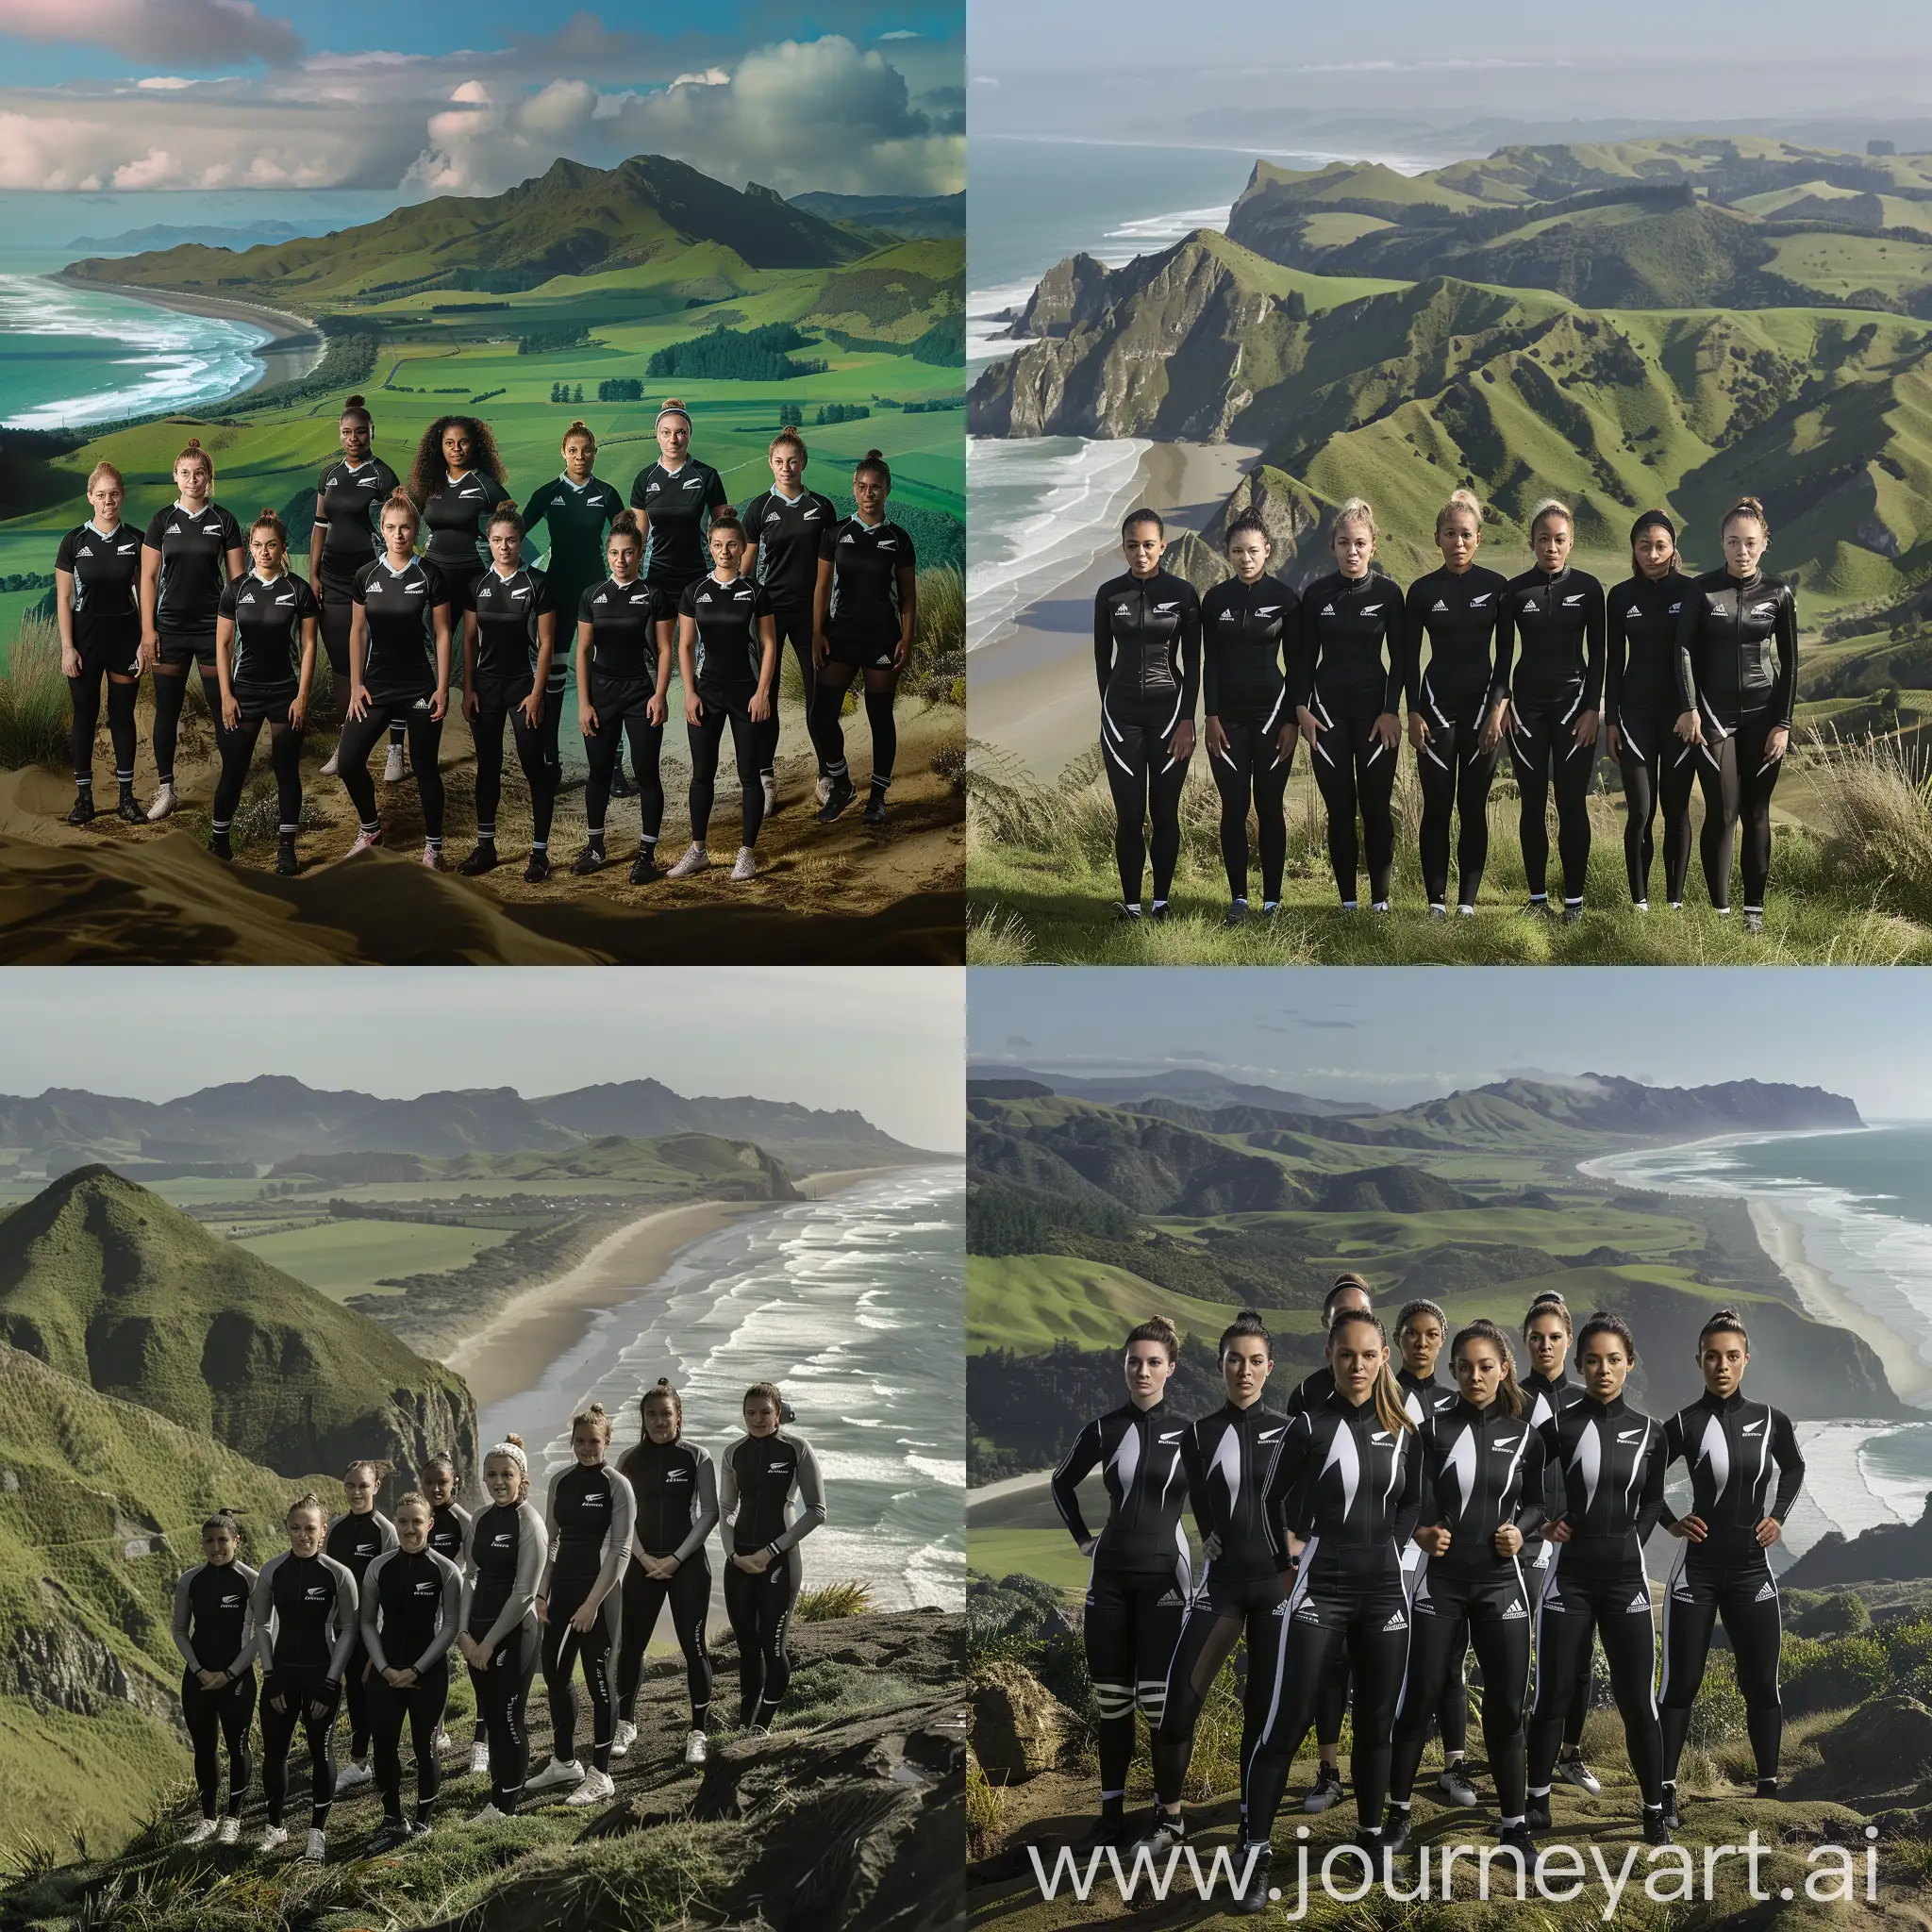 The real New Zealand Black Ferns women's 7s team of 2023 standing tall and proud in their sleek Black Ferns tracksuit uniforms against the backdrop of a stunning vista of New Zealand's breathtaking landscape. The rolling green hills, majestic mountains, and pristine beach create a breathtaking contrast to the team's black and white attire. The players are arranged dynamically, each with their eyes fixed forward and their bodies poised for action, emanating confidence and determination. The image captures the essence of strength, unity, and the indomitable spirit of the Black Ferns as they stand ready to conquer the rugby field. Against the serene beauty of nature, the team's presence is powerful and commanding, drawing the viewer's attention to their remarkable resilience and unyielding commitment to their sport. The players, each unique in their build and features, stand together as a symbol of diversity and inclusivity, united by their shared passion for rugby and their country. The image concludes with a striking view of the horizon, promising more exciting matches and victories for the Black Ferns in the year to come.